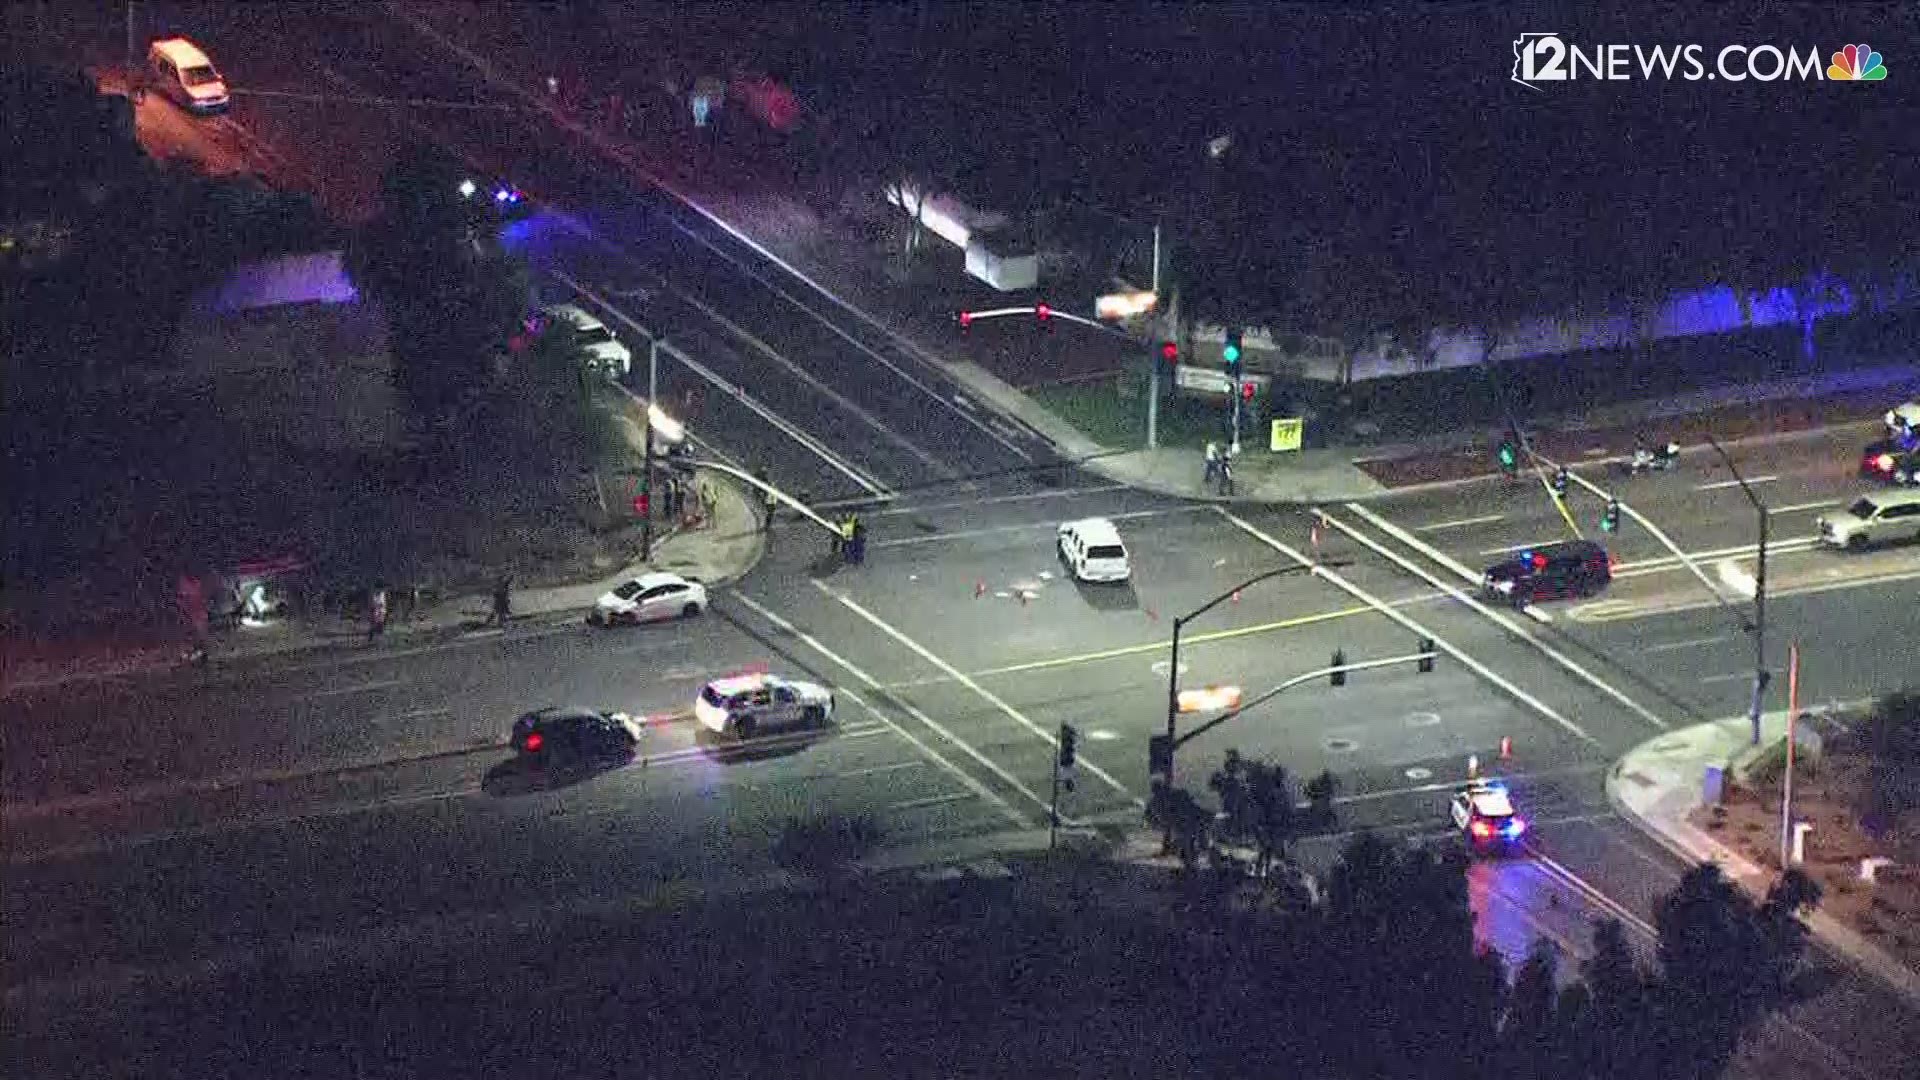 A pedestrian was struck while walking across the intersection at Arrowhead. The pedestrian was transported to the hospital and later pronounced dead. The intersection is closed while officers investigate.